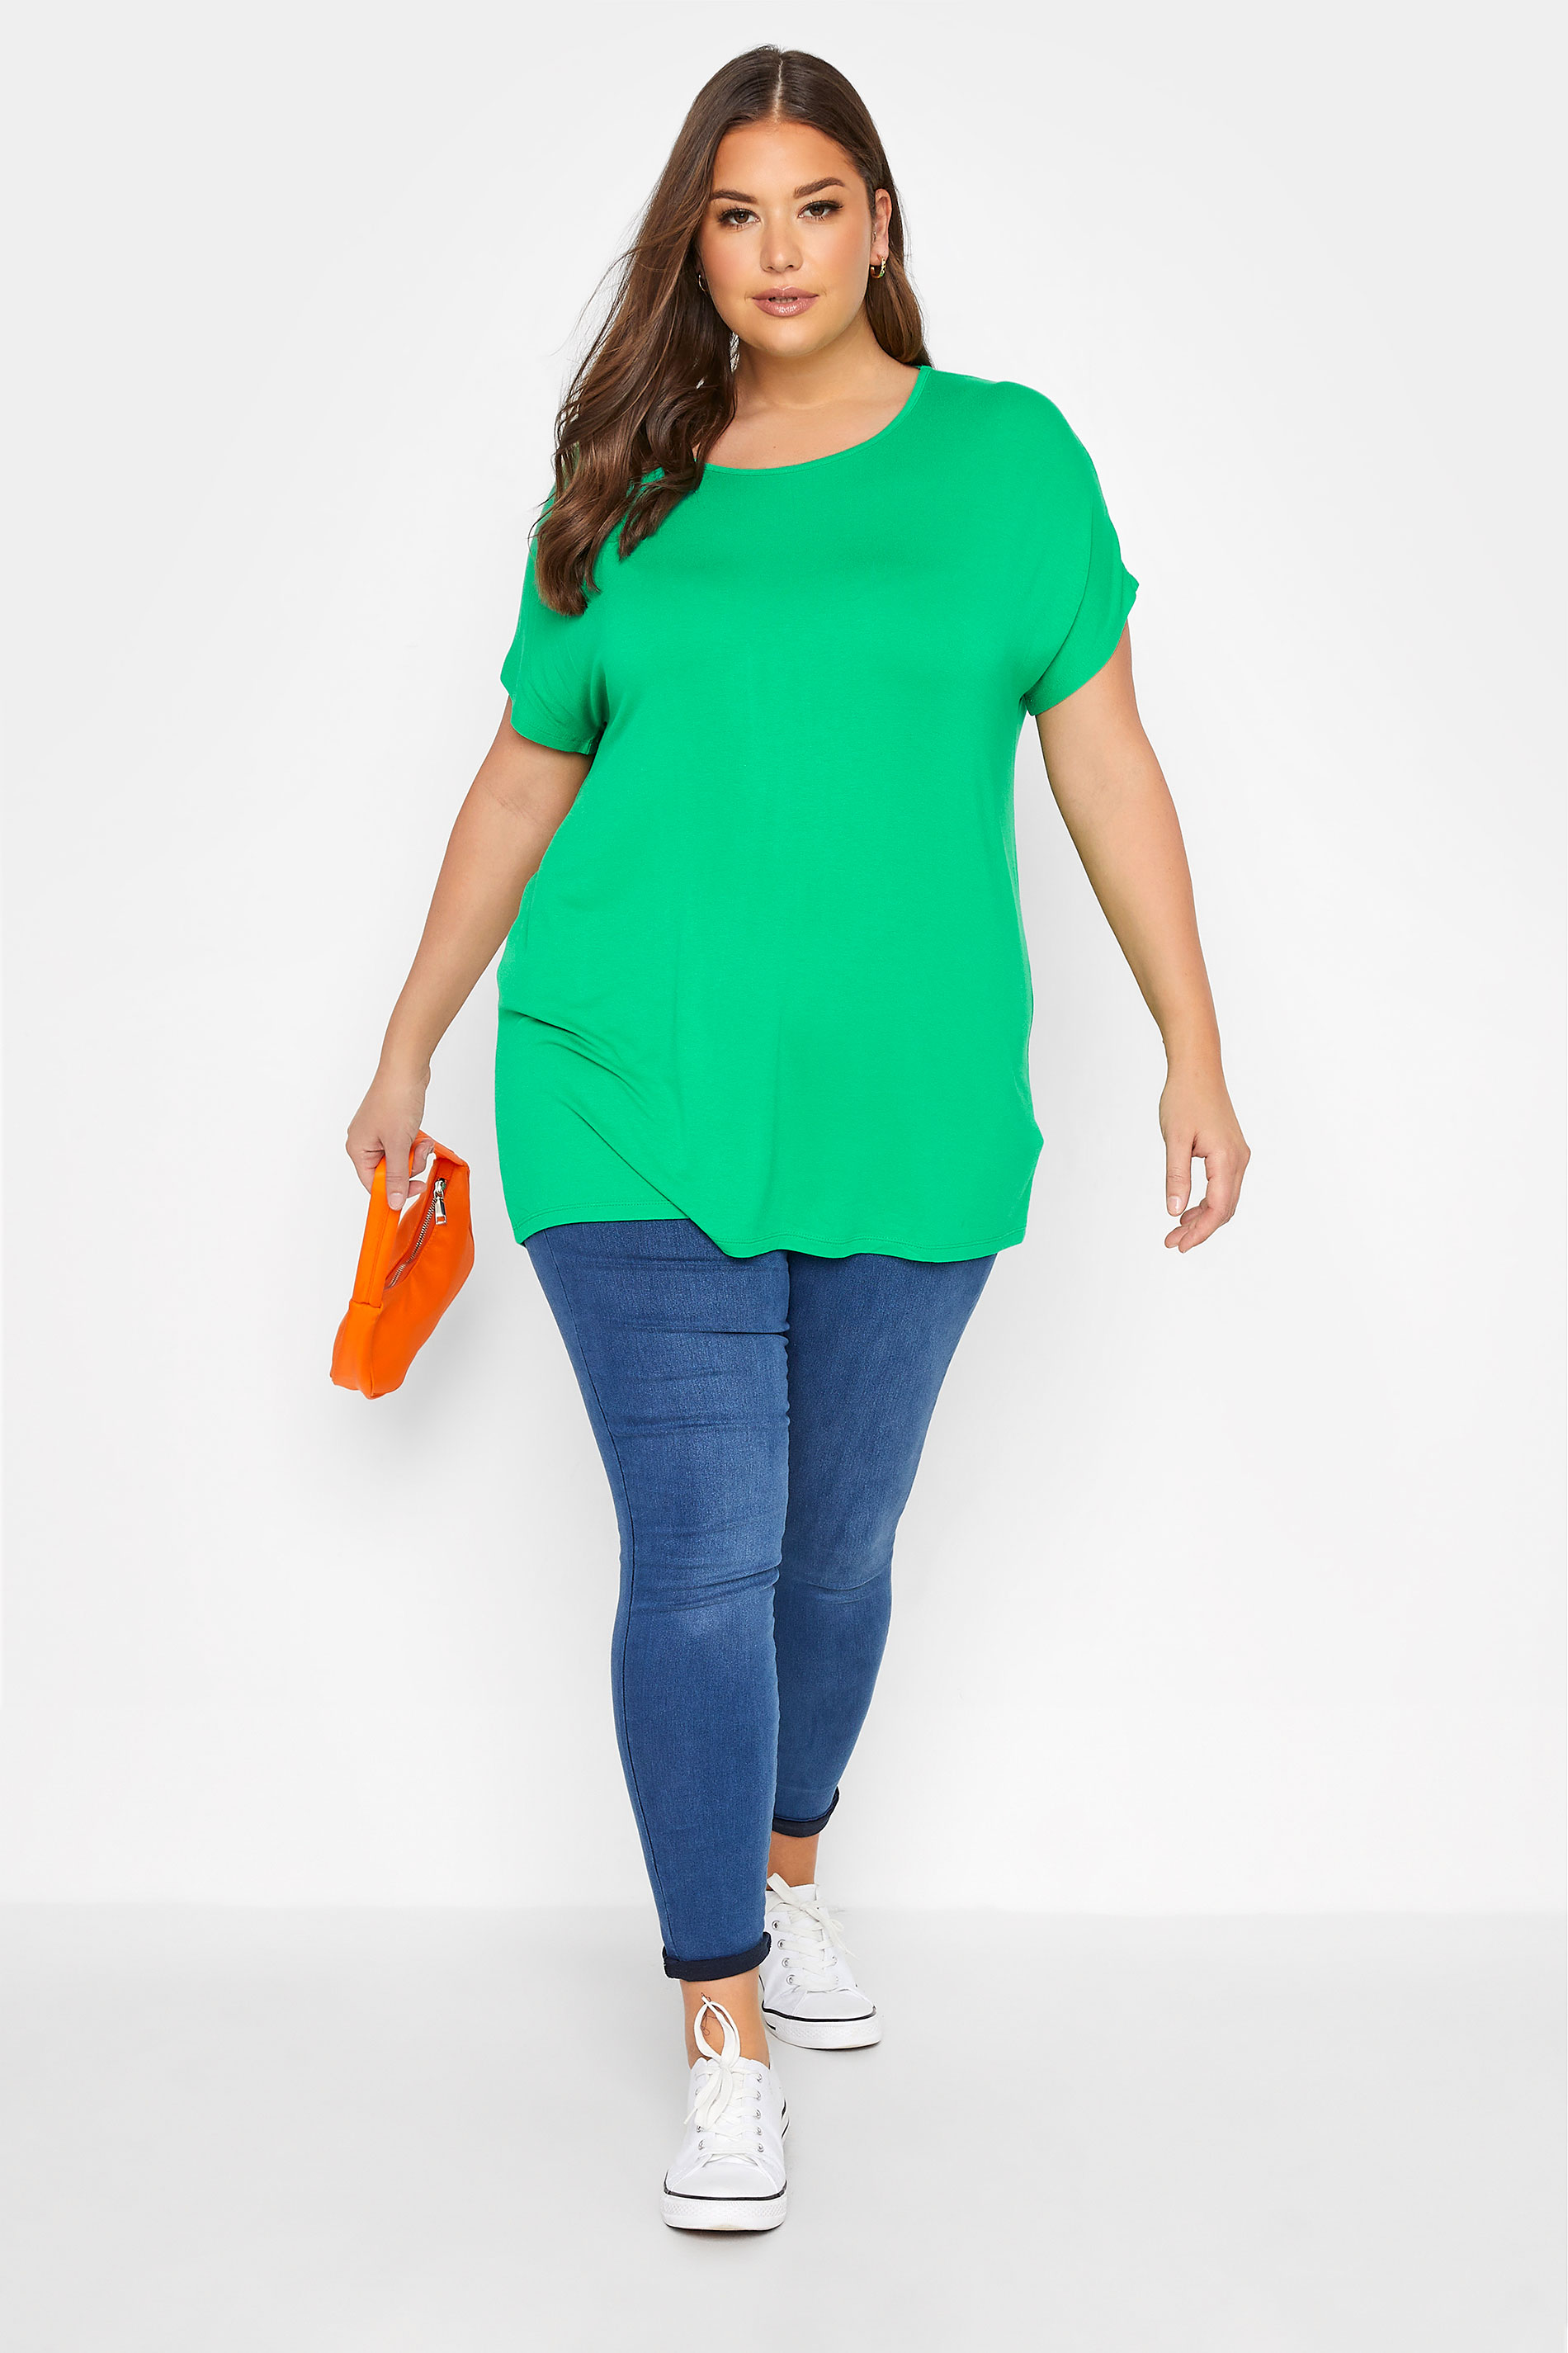 Grande taille  Tops Grande taille  T-Shirts | T-Shirt Vert Flashy Manches Courtes Jersey - IE08338